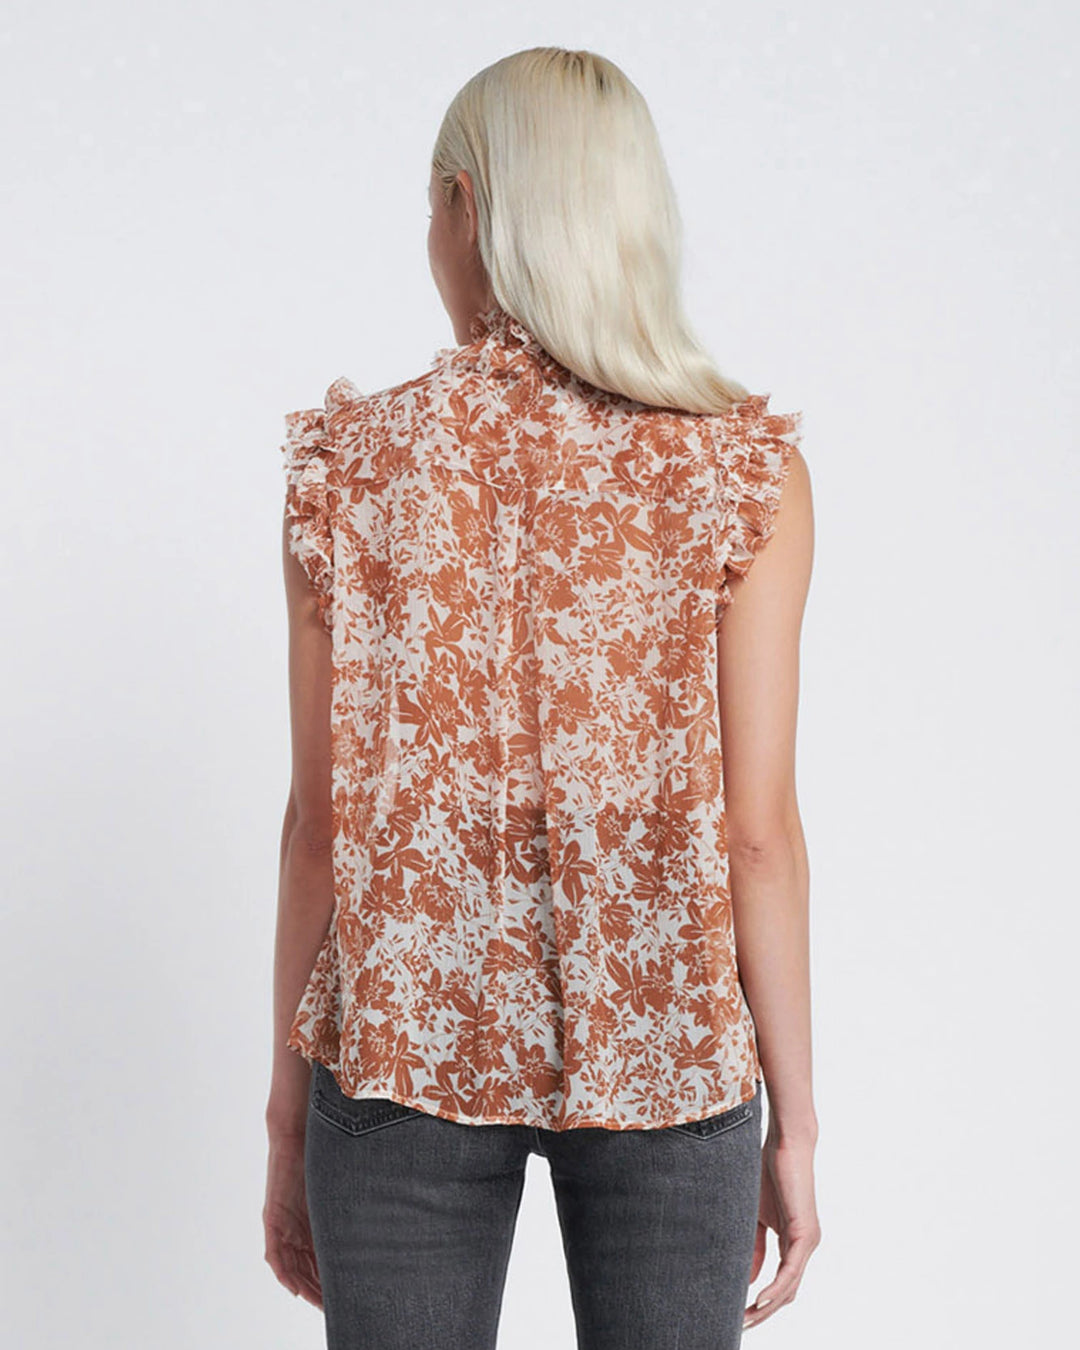 SLEEVELESS RUFFLE TOP - 7 FOR ALL MANKIND